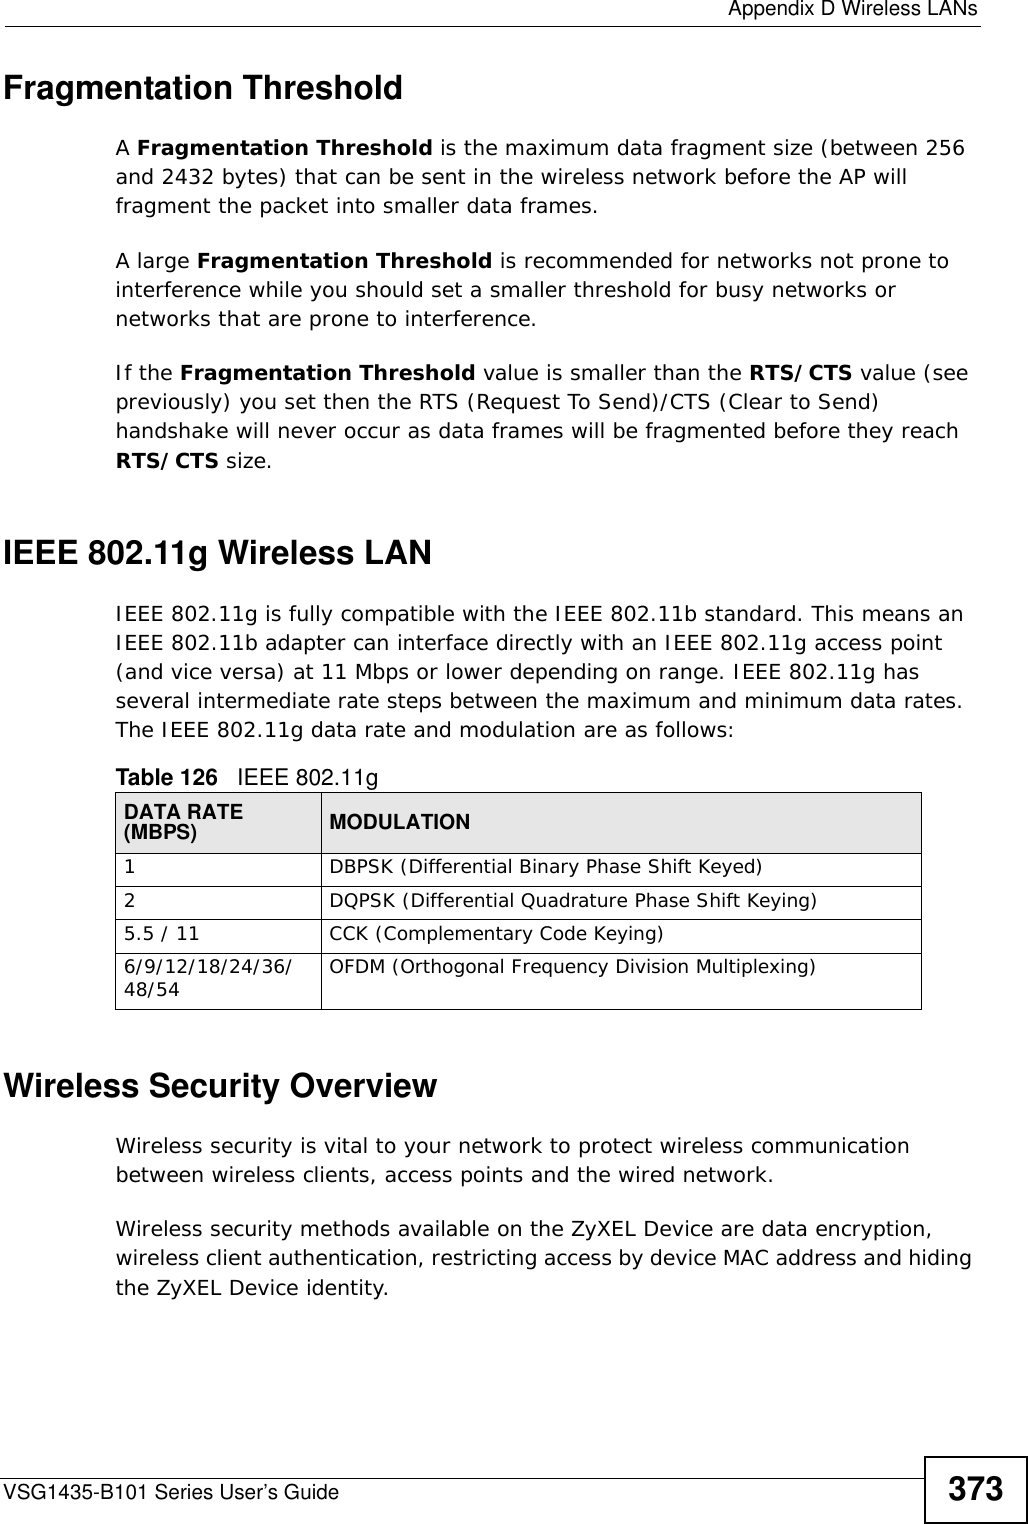  Appendix D Wireless LANsVSG1435-B101 Series User’s Guide 373Fragmentation ThresholdA Fragmentation Threshold is the maximum data fragment size (between 256 and 2432 bytes) that can be sent in the wireless network before the AP will fragment the packet into smaller data frames.A large Fragmentation Threshold is recommended for networks not prone to interference while you should set a smaller threshold for busy networks or networks that are prone to interference.If the Fragmentation Threshold value is smaller than the RTS/CTS value (see previously) you set then the RTS (Request To Send)/CTS (Clear to Send) handshake will never occur as data frames will be fragmented before they reach RTS/CTS size.IEEE 802.11g Wireless LANIEEE 802.11g is fully compatible with the IEEE 802.11b standard. This means an IEEE 802.11b adapter can interface directly with an IEEE 802.11g access point (and vice versa) at 11 Mbps or lower depending on range. IEEE 802.11g has several intermediate rate steps between the maximum and minimum data rates. The IEEE 802.11g data rate and modulation are as follows:Wireless Security OverviewWireless security is vital to your network to protect wireless communication between wireless clients, access points and the wired network.Wireless security methods available on the ZyXEL Device are data encryption, wireless client authentication, restricting access by device MAC address and hiding the ZyXEL Device identity.Table 126   IEEE 802.11gDATA RATE (MBPS) MODULATION1 DBPSK (Differential Binary Phase Shift Keyed)2 DQPSK (Differential Quadrature Phase Shift Keying)5.5 / 11 CCK (Complementary Code Keying) 6/9/12/18/24/36/48/54 OFDM (Orthogonal Frequency Division Multiplexing) 